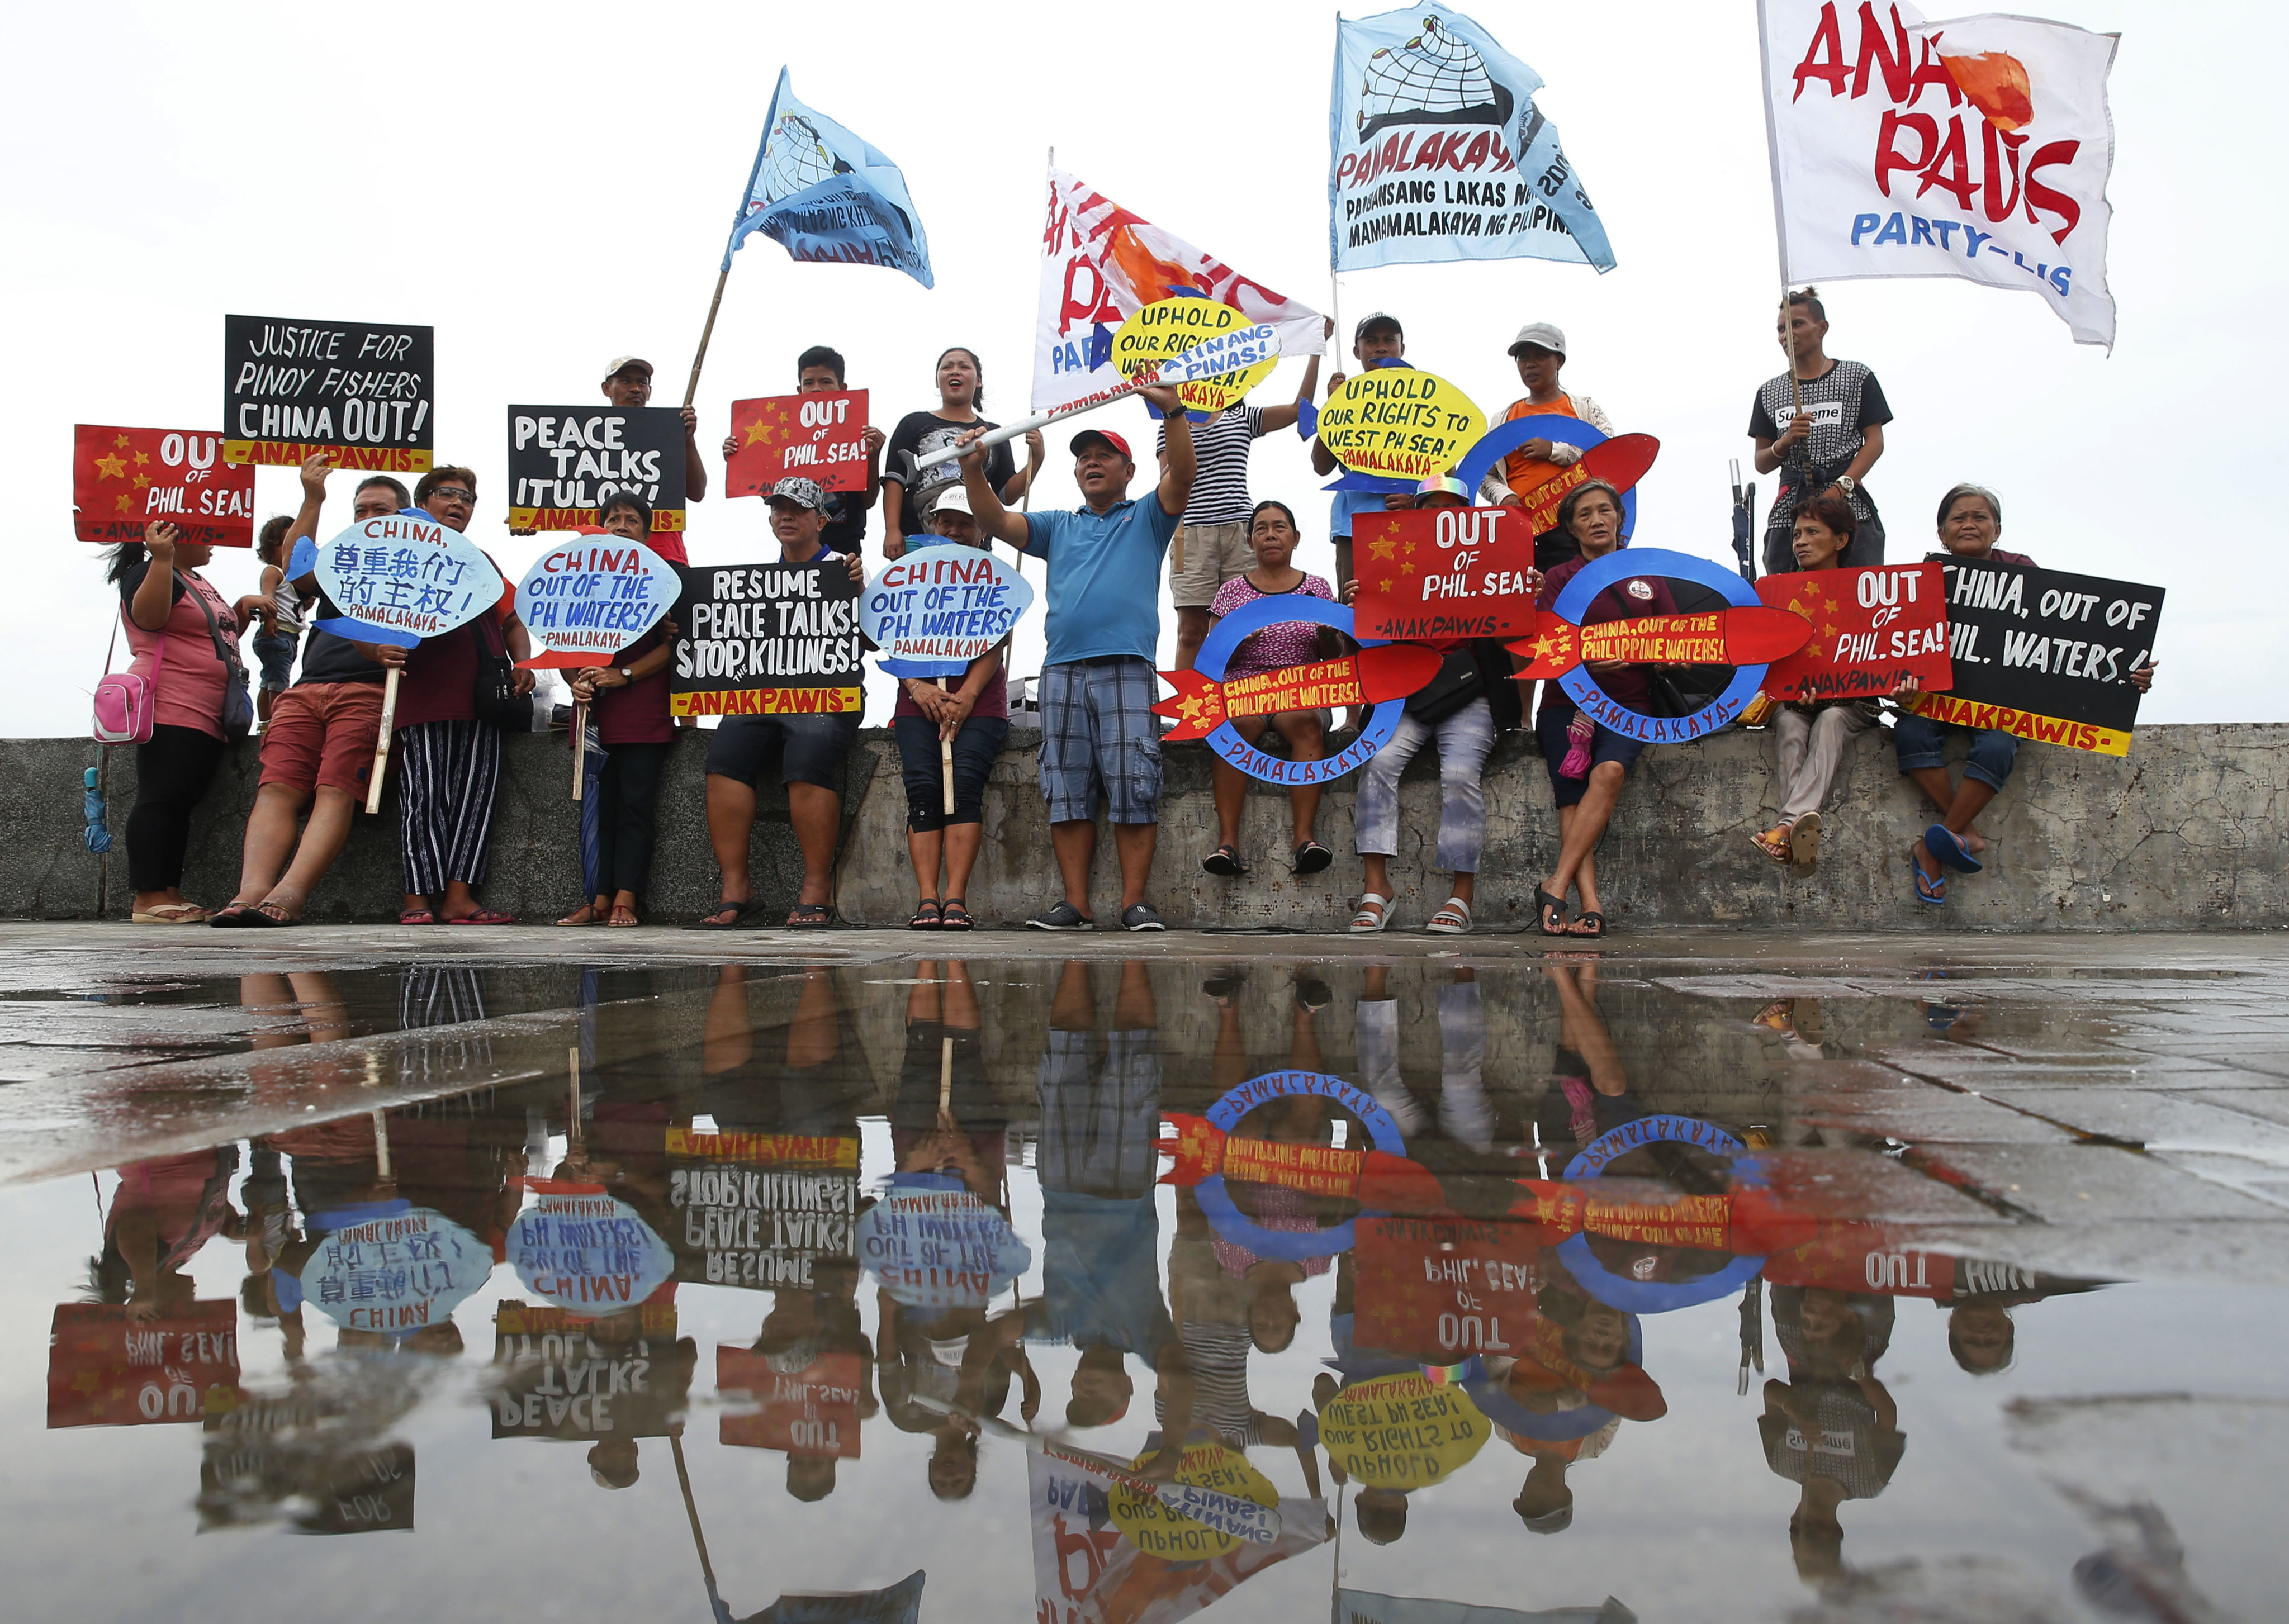 People protest against China over its coastguard’s alleged seizure of fish caught by Filipino fishermen near the contested Scarborough Shoal in the South China Sea. Photo: AP